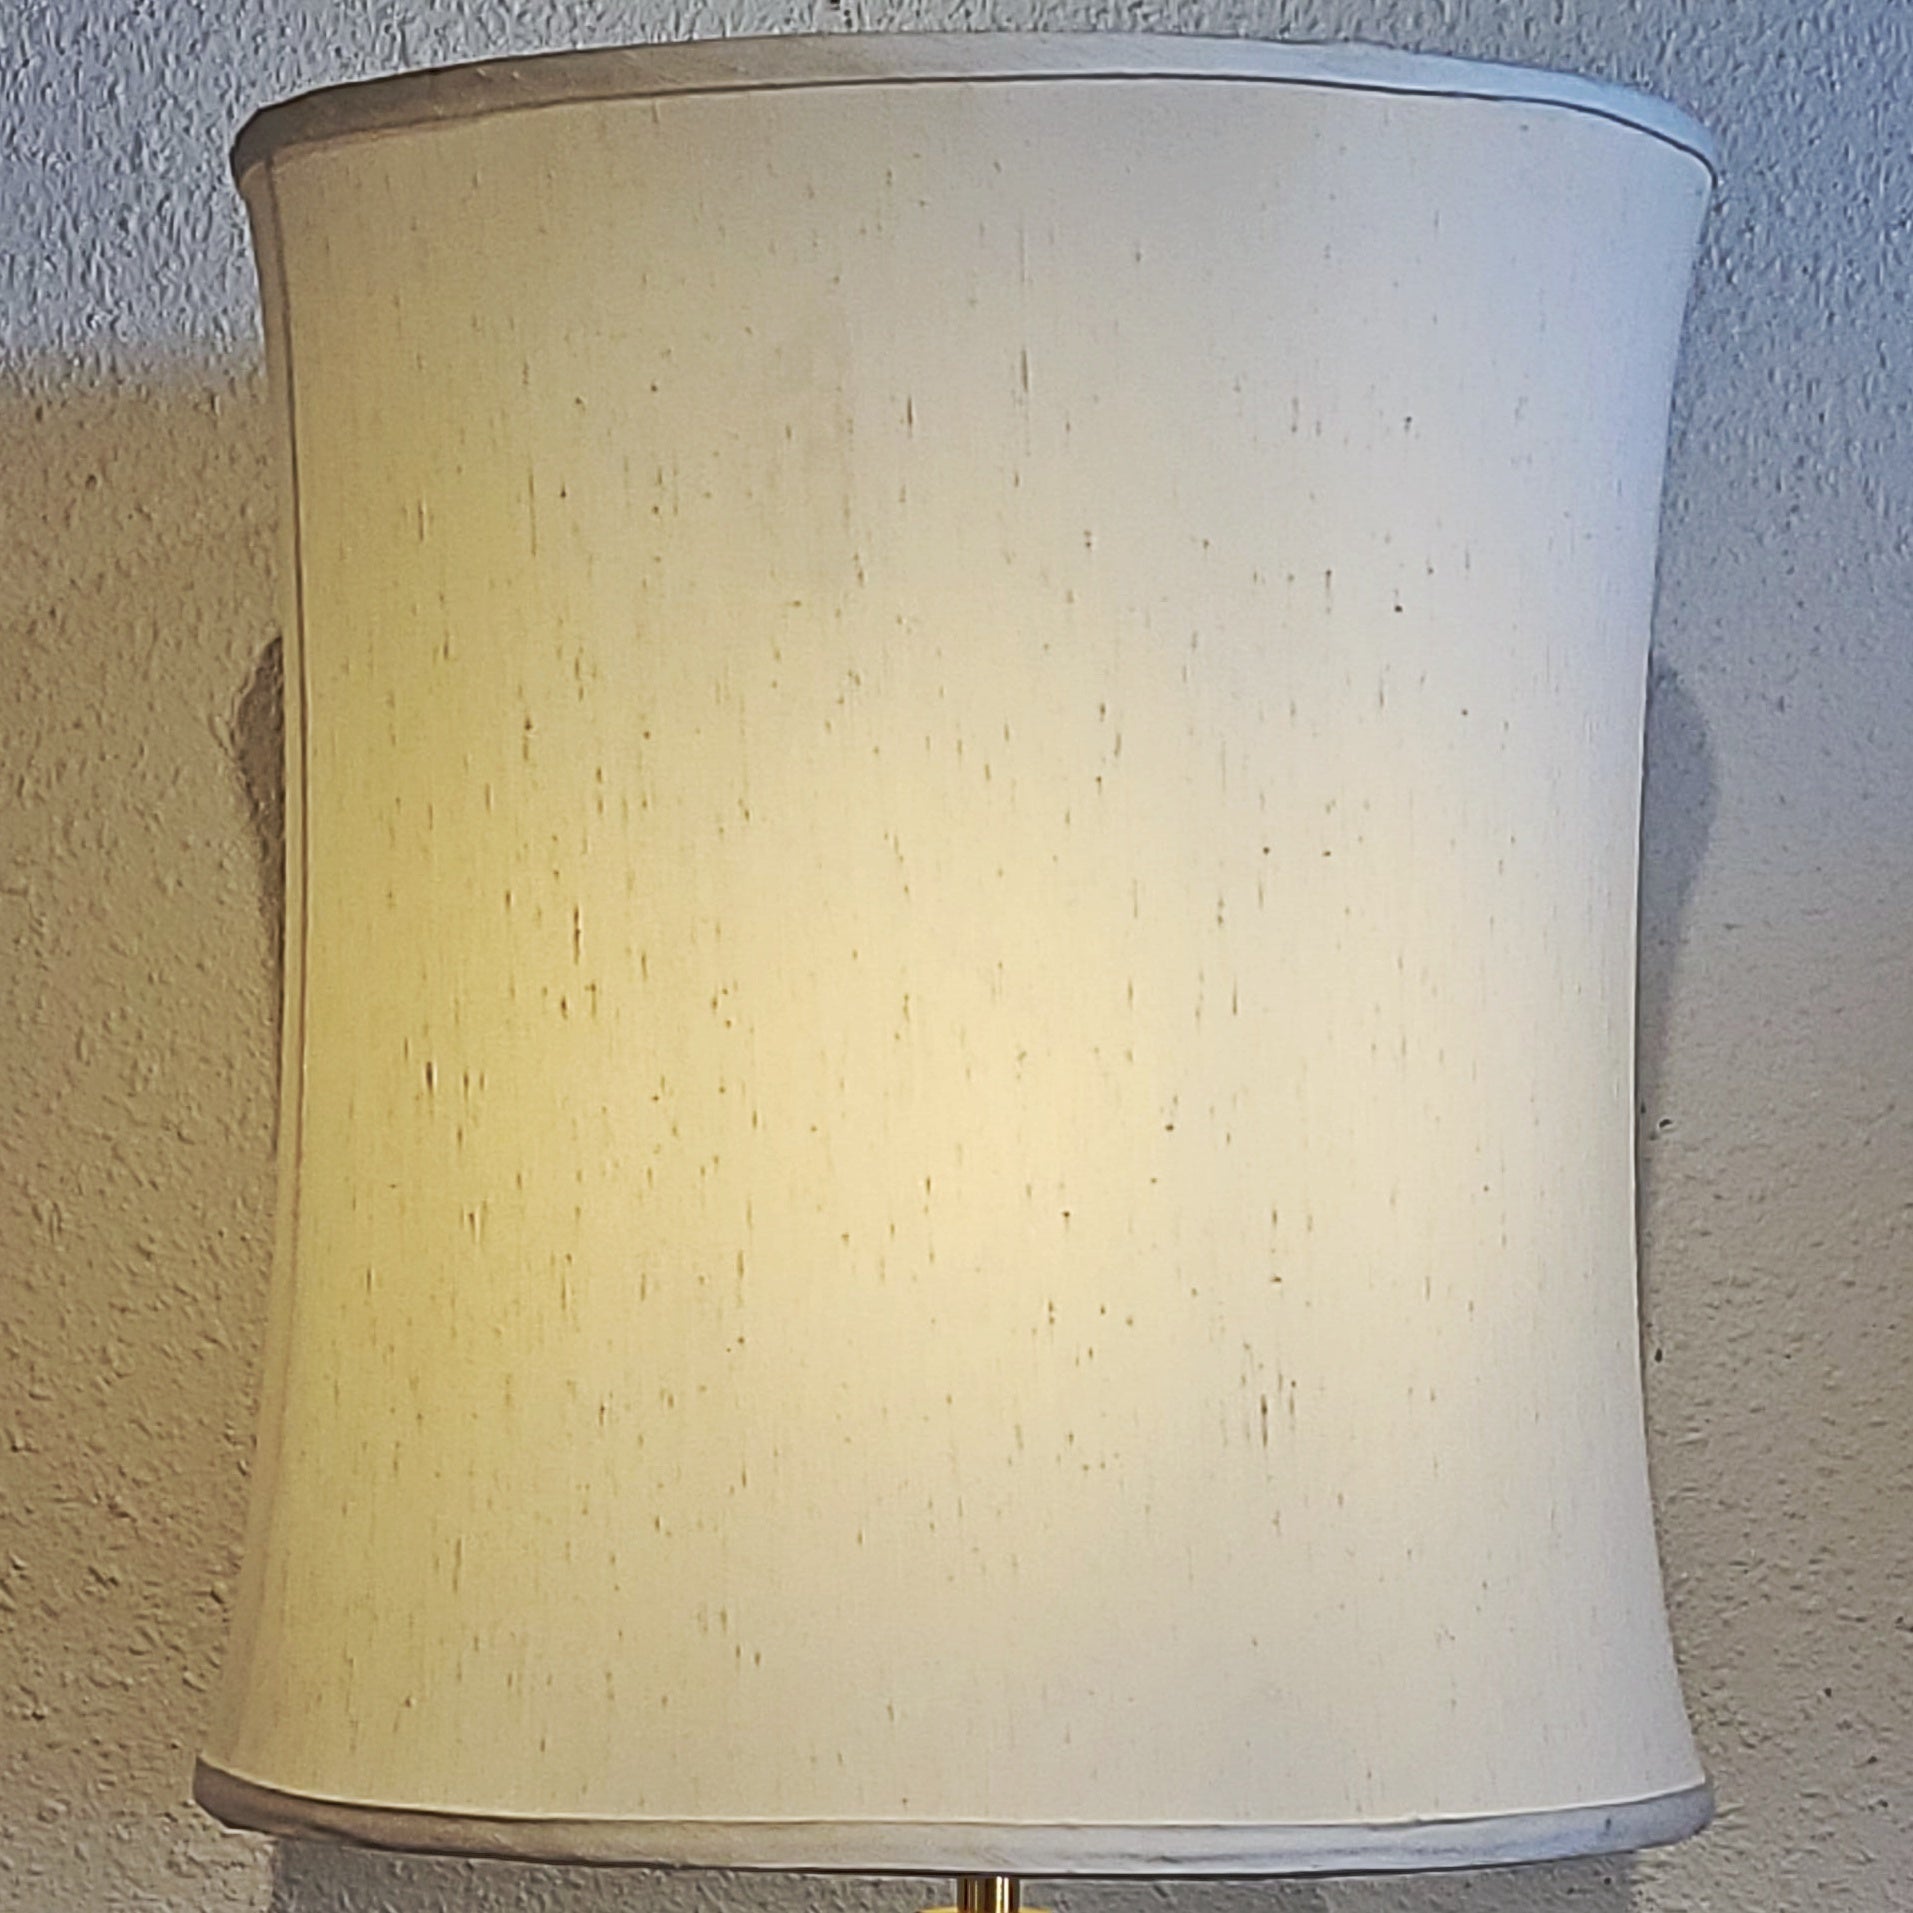 TUBULAR GLASS AND BRASS STIFFEL-STYLE TABLE LAMP WITH LINED SHADE